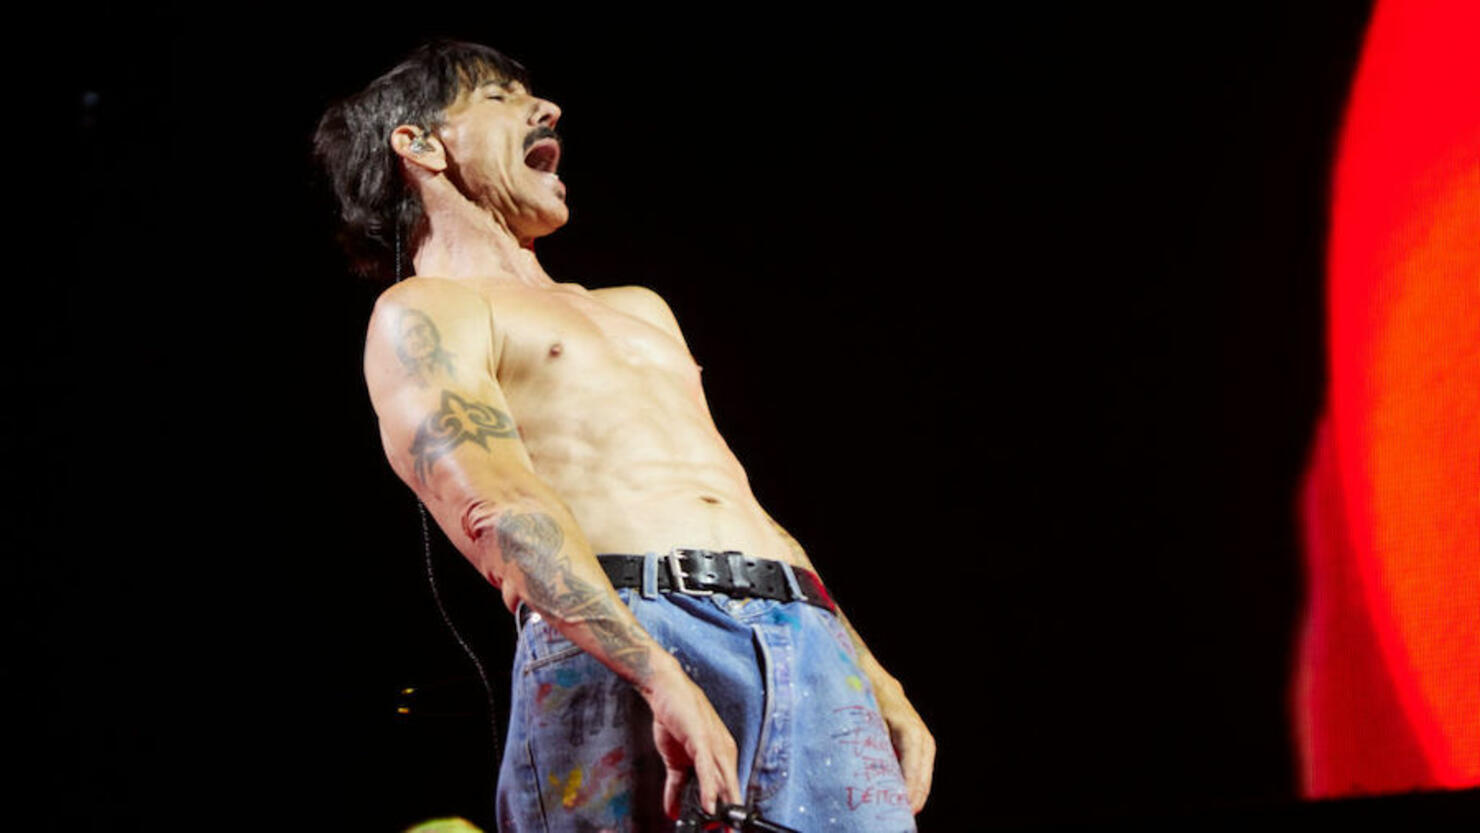 Red Hot Chili Peppers Opening Concert Of Their International Tour